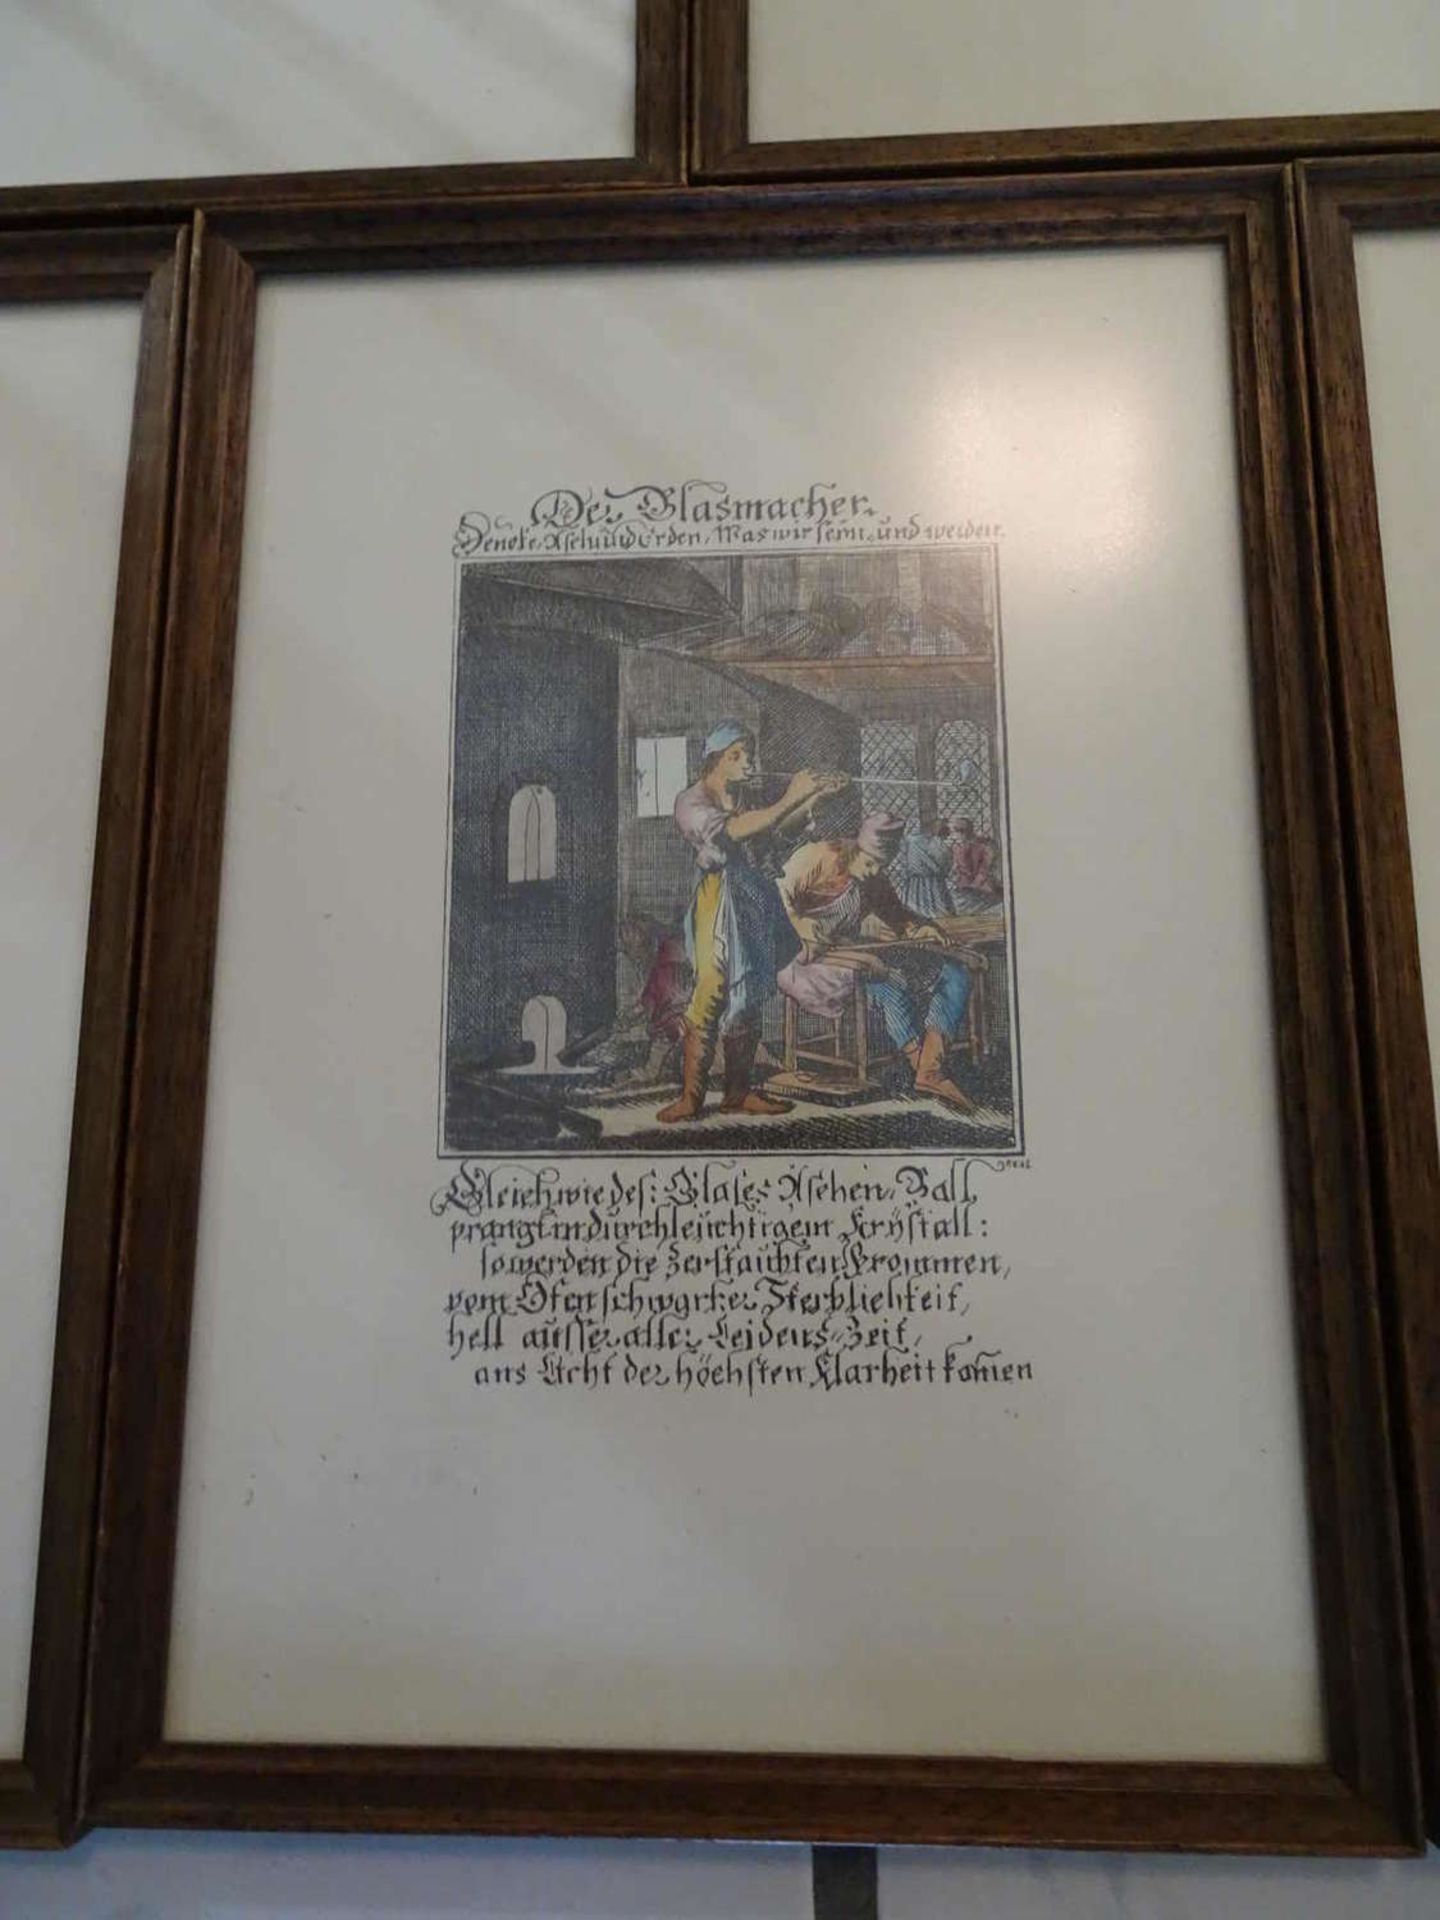 Lot of lithographs, various professions, while "The Baker", "The saddler", etc. A total of 7 - Bild 2 aus 2